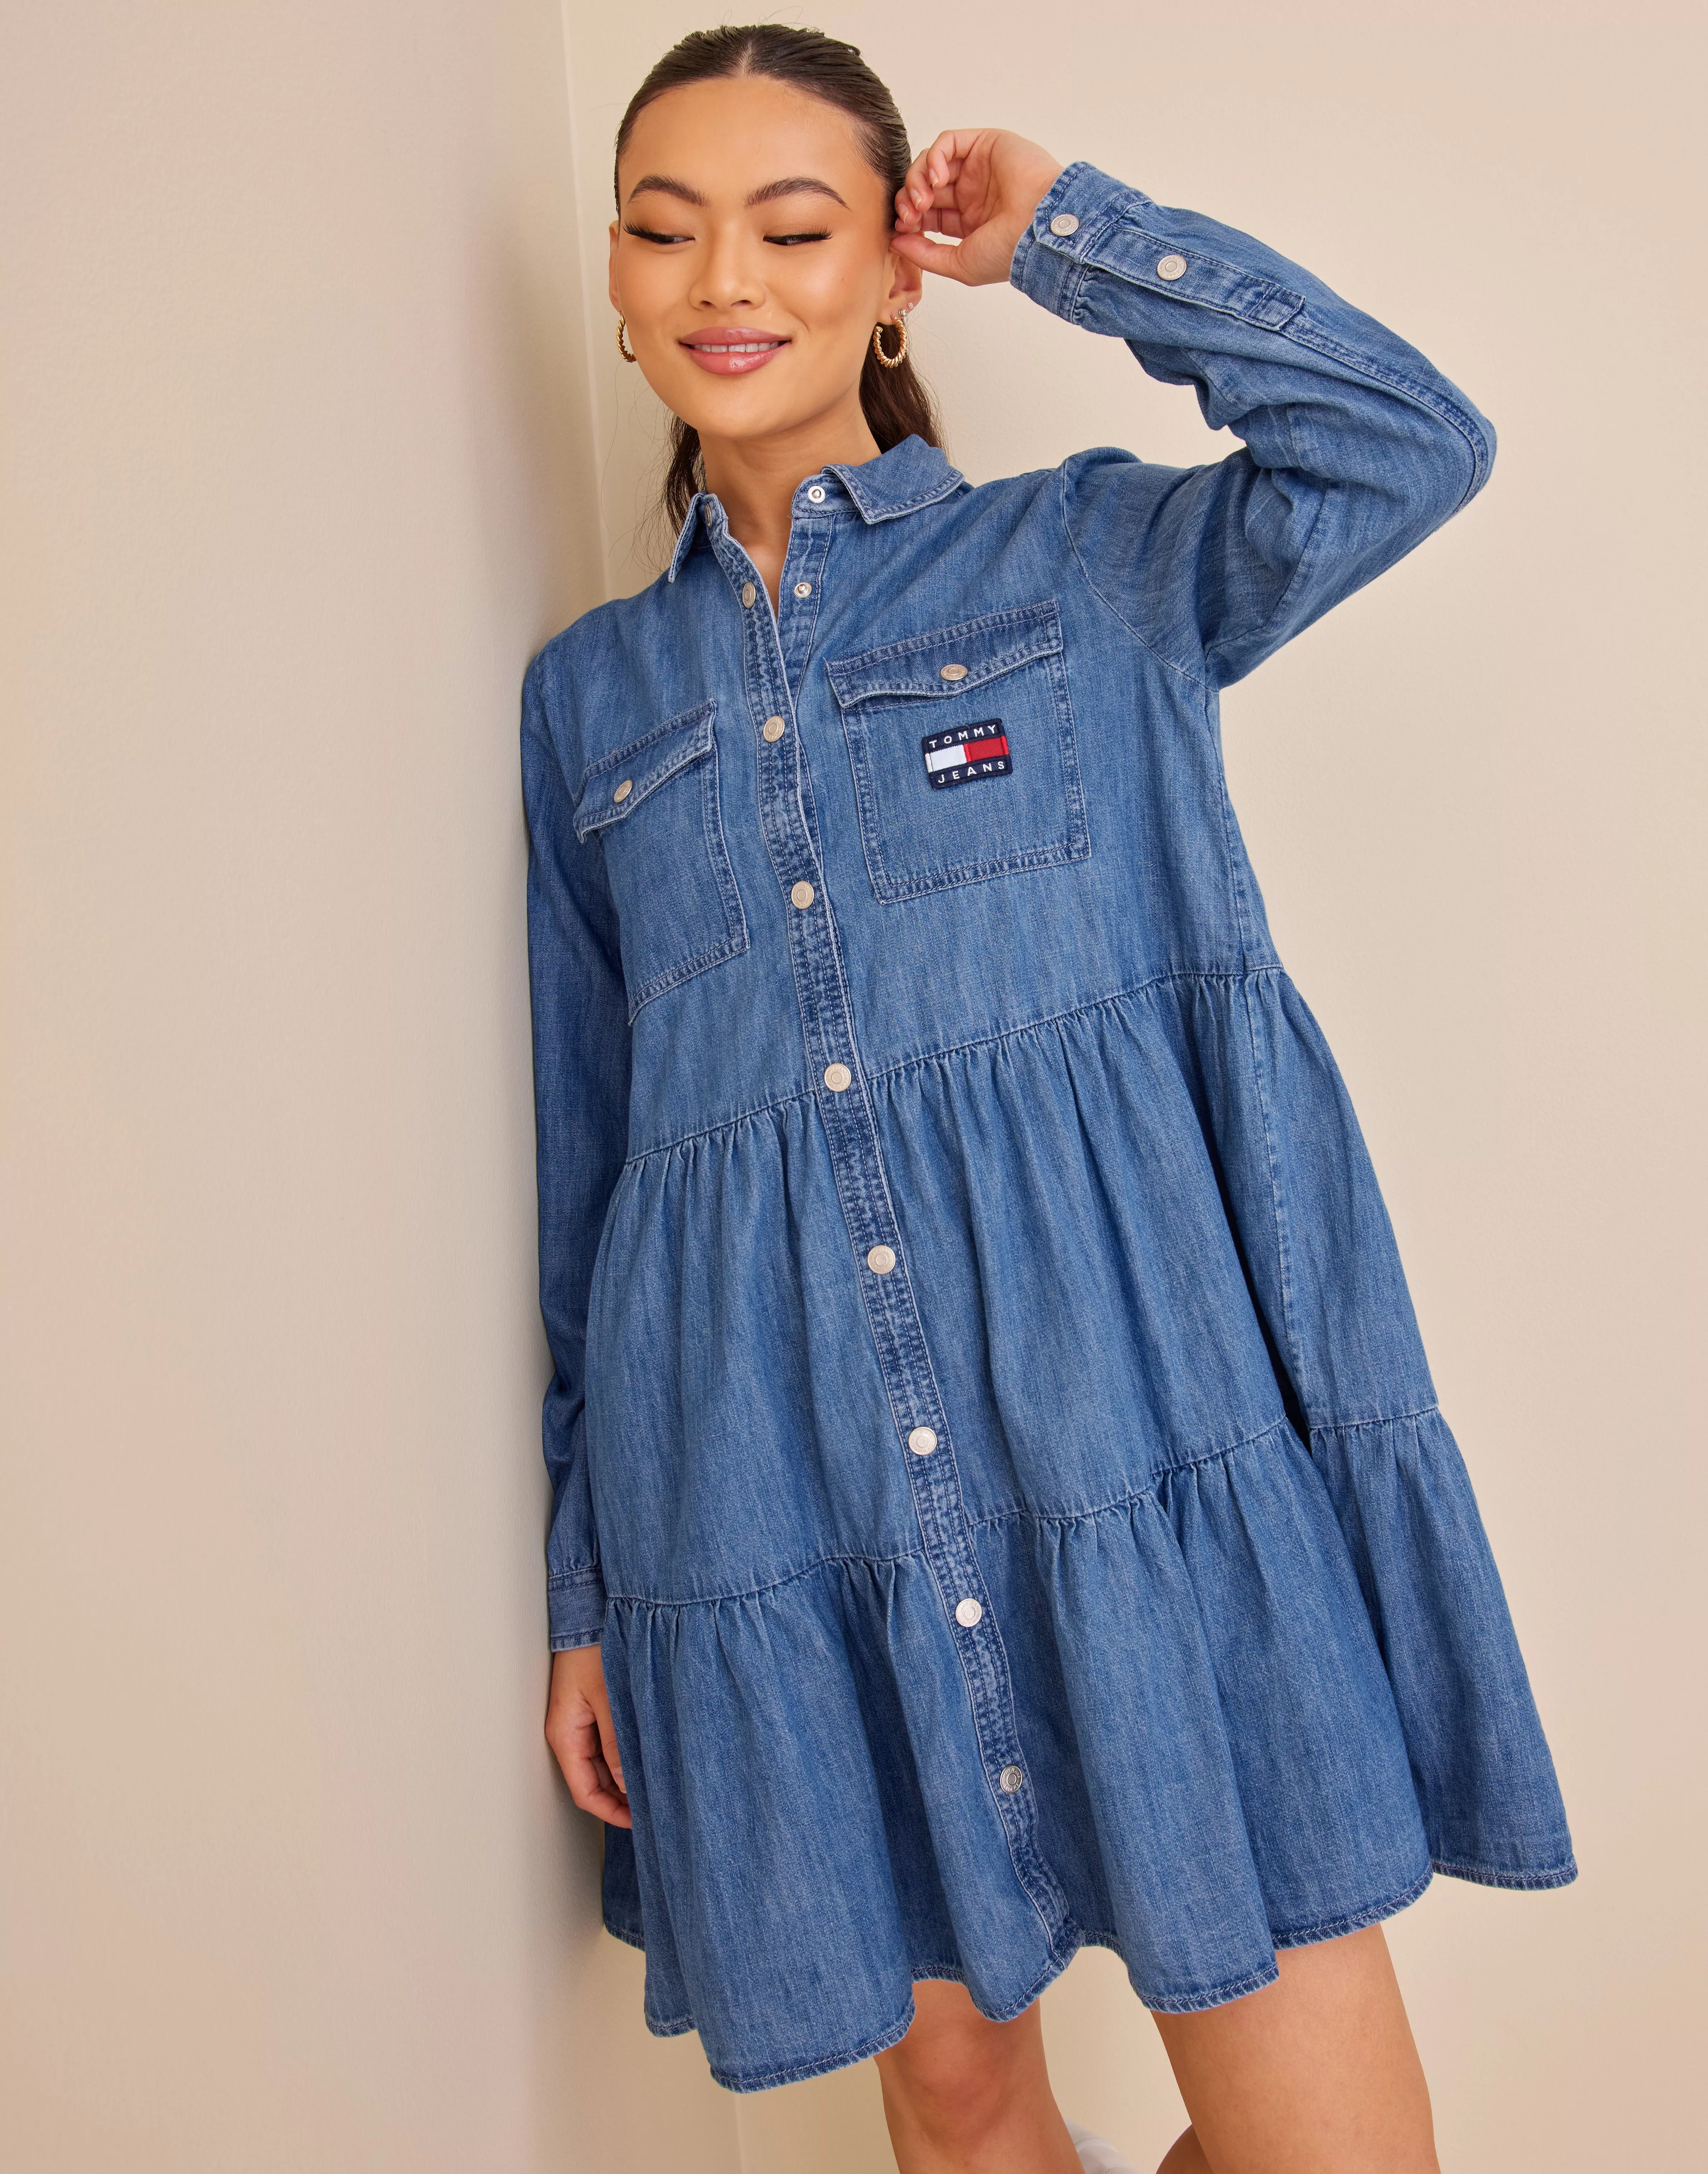 Denim Tommy DRESS Jeans TJW CHAMBRAY - SHIRT TIERED Buy